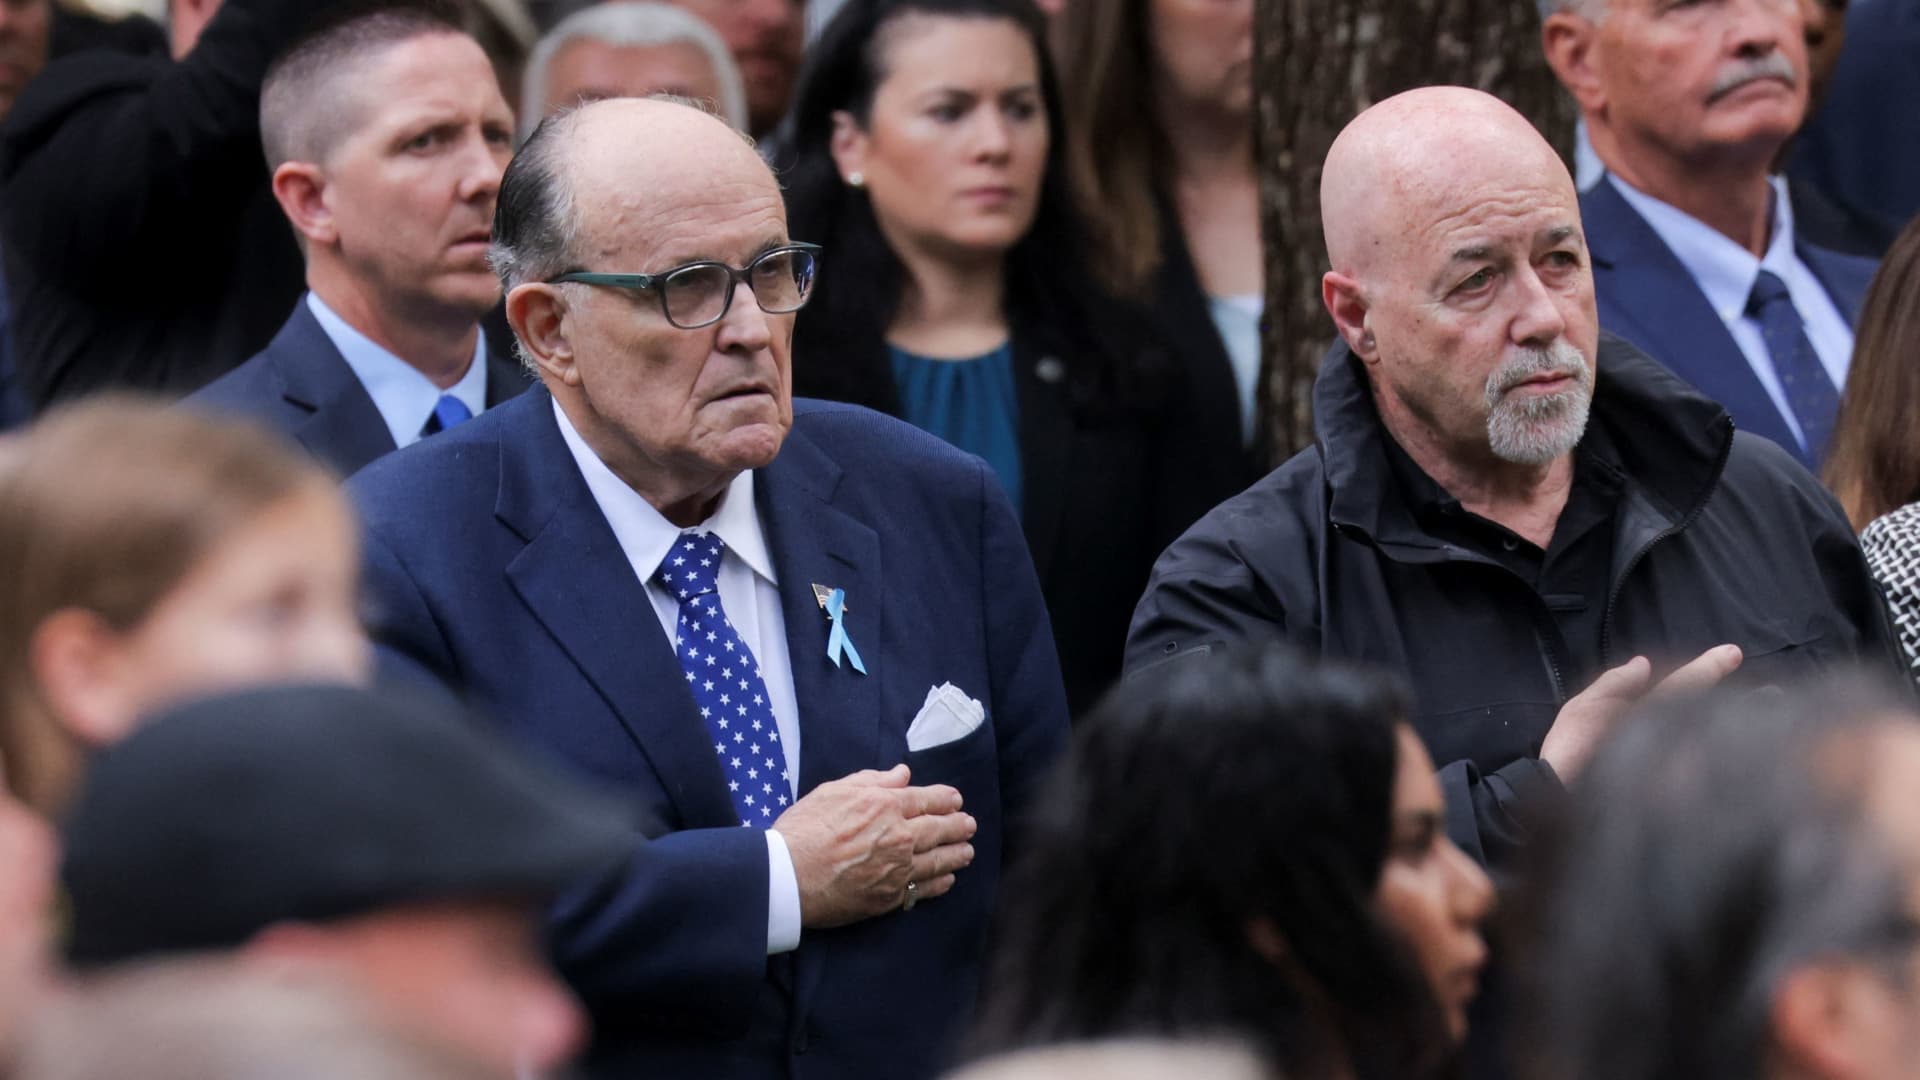 Former New York Mayor Rudy Giuliani, left, attends the ceremony marking the 22nd anniversary of the 9/11 attacks at the National September 11 Memorial & Museum, in New York, Sept. 11, 2023.